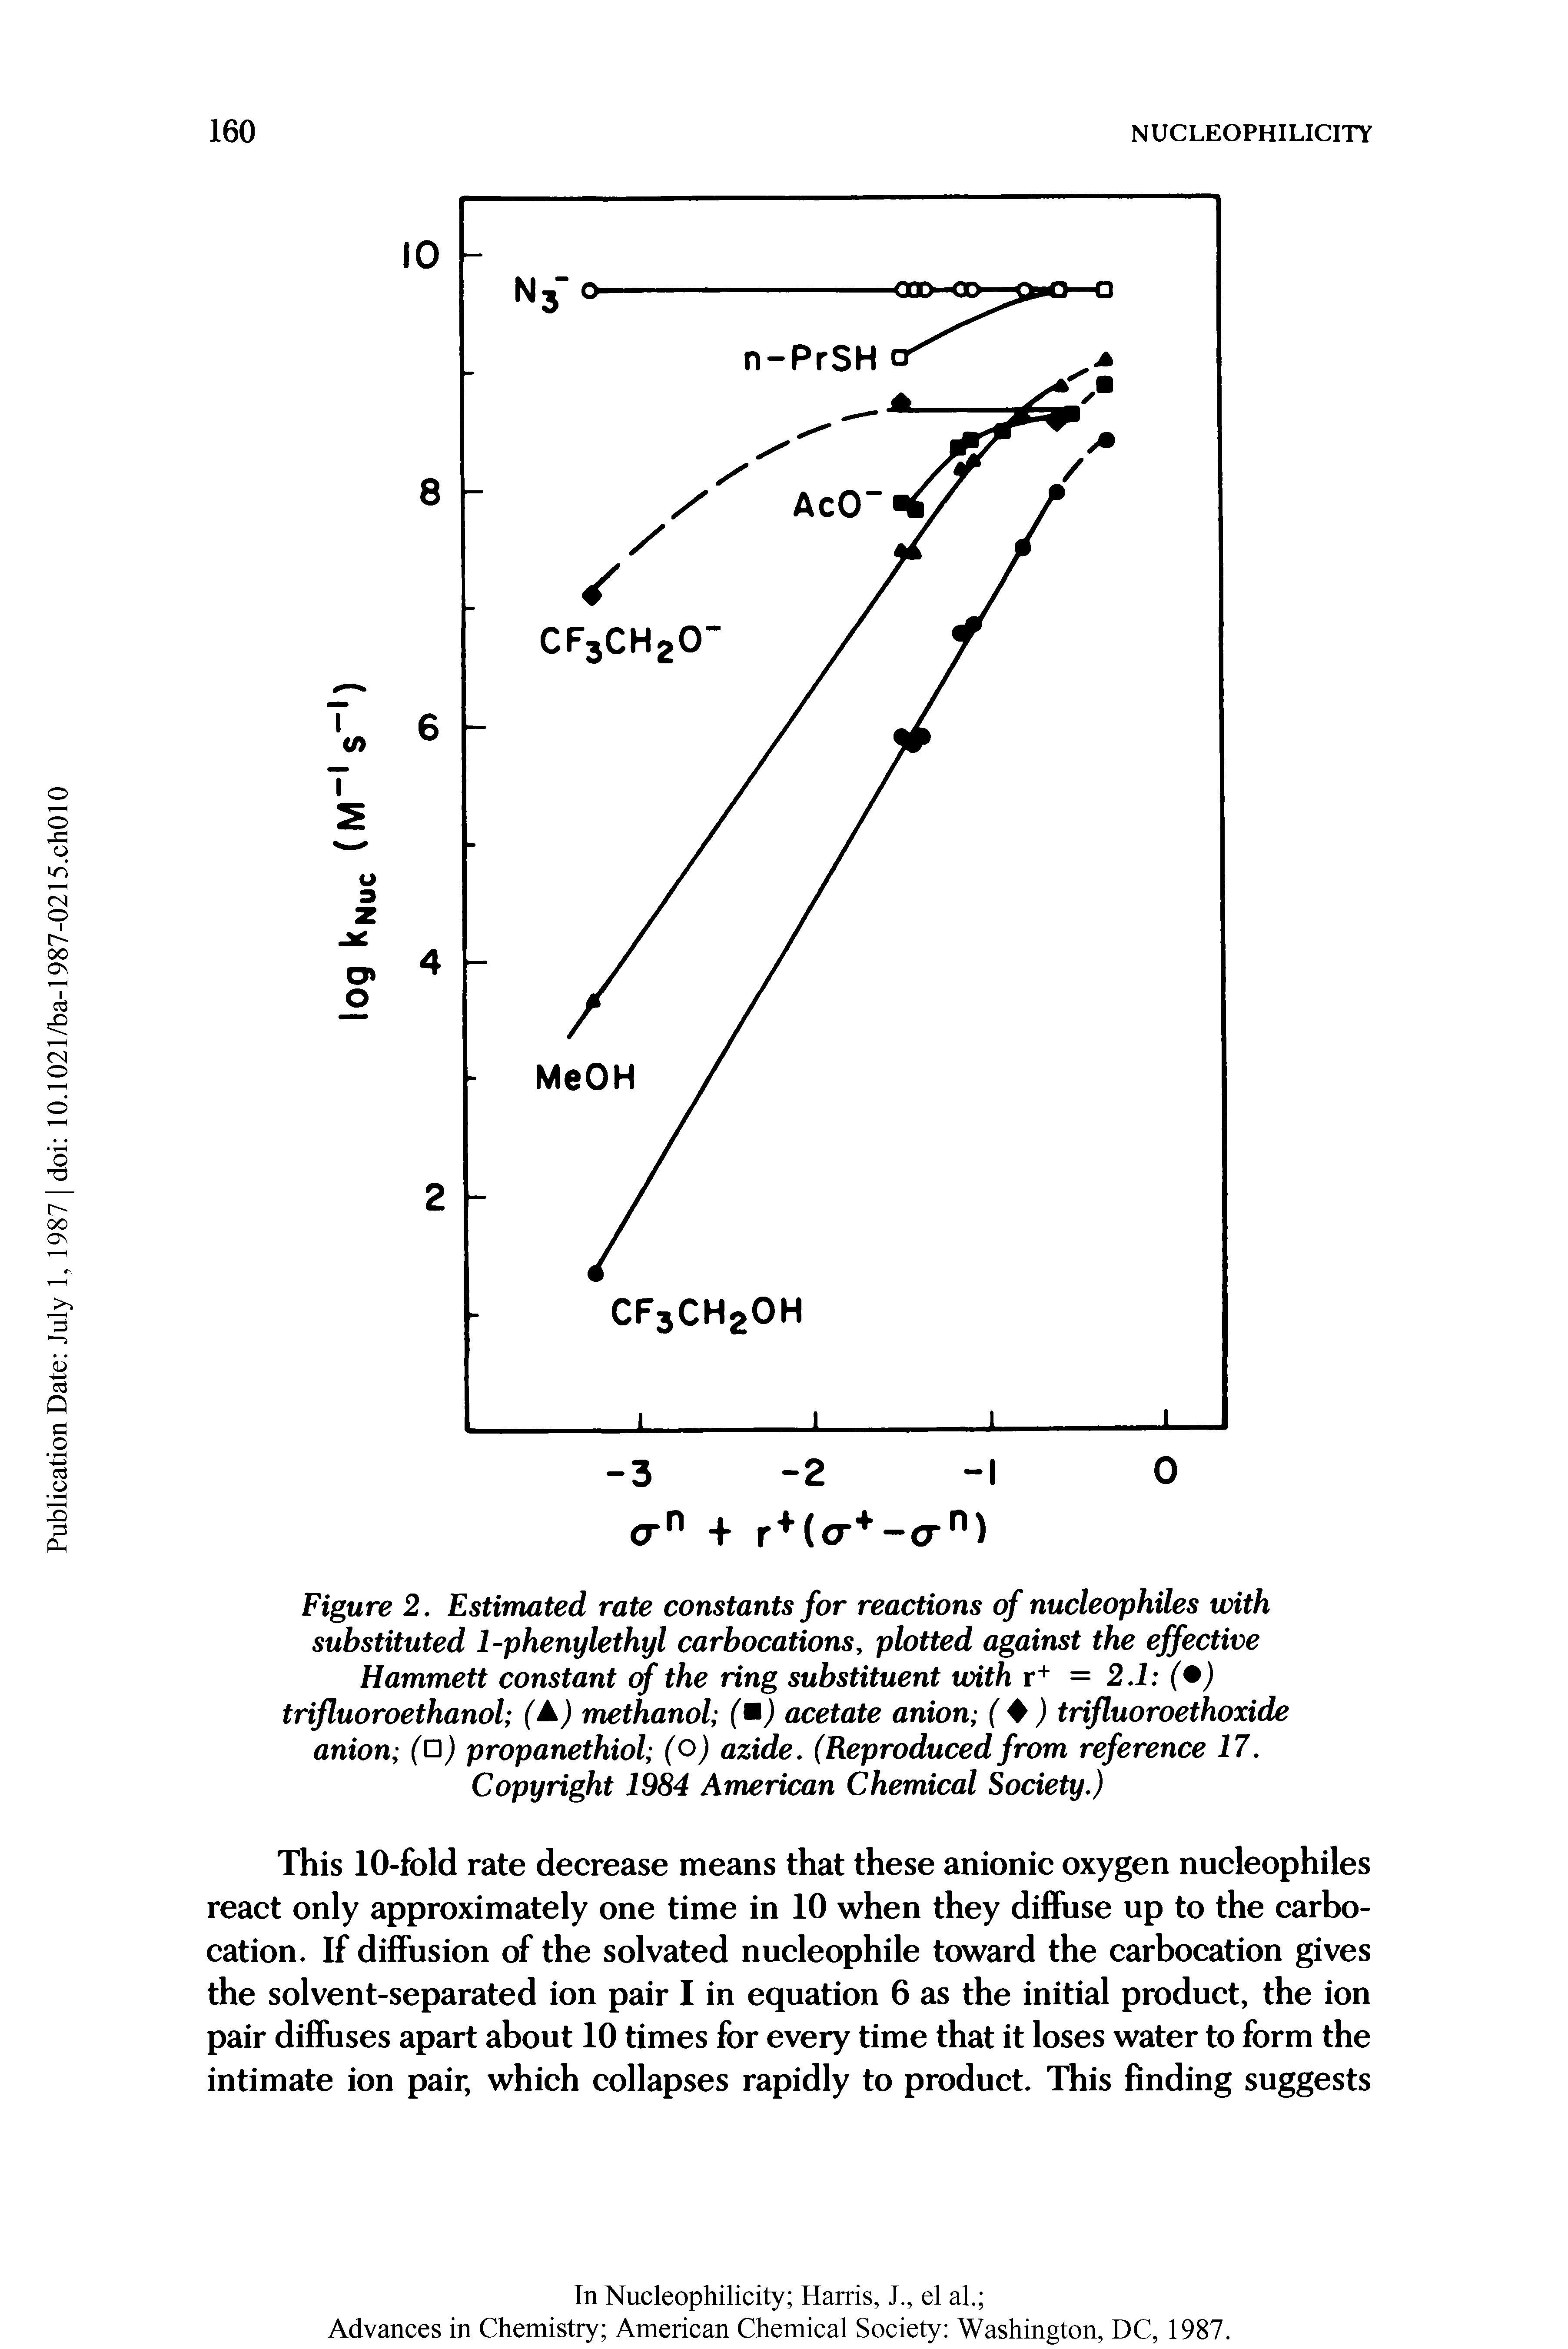 Figure 2. Estimated rate constants for reactions of nucleophiles with substituted 1-phenylethyl carbocations, plotted against the effective Hammett constant of the ring substituent with r+ = 2.1 (+) trifluoroethanol (A) methanol acetate anion ( ) trifluoroethoxide anion propanethiol (o) azide. (Reproduced from reference 17.